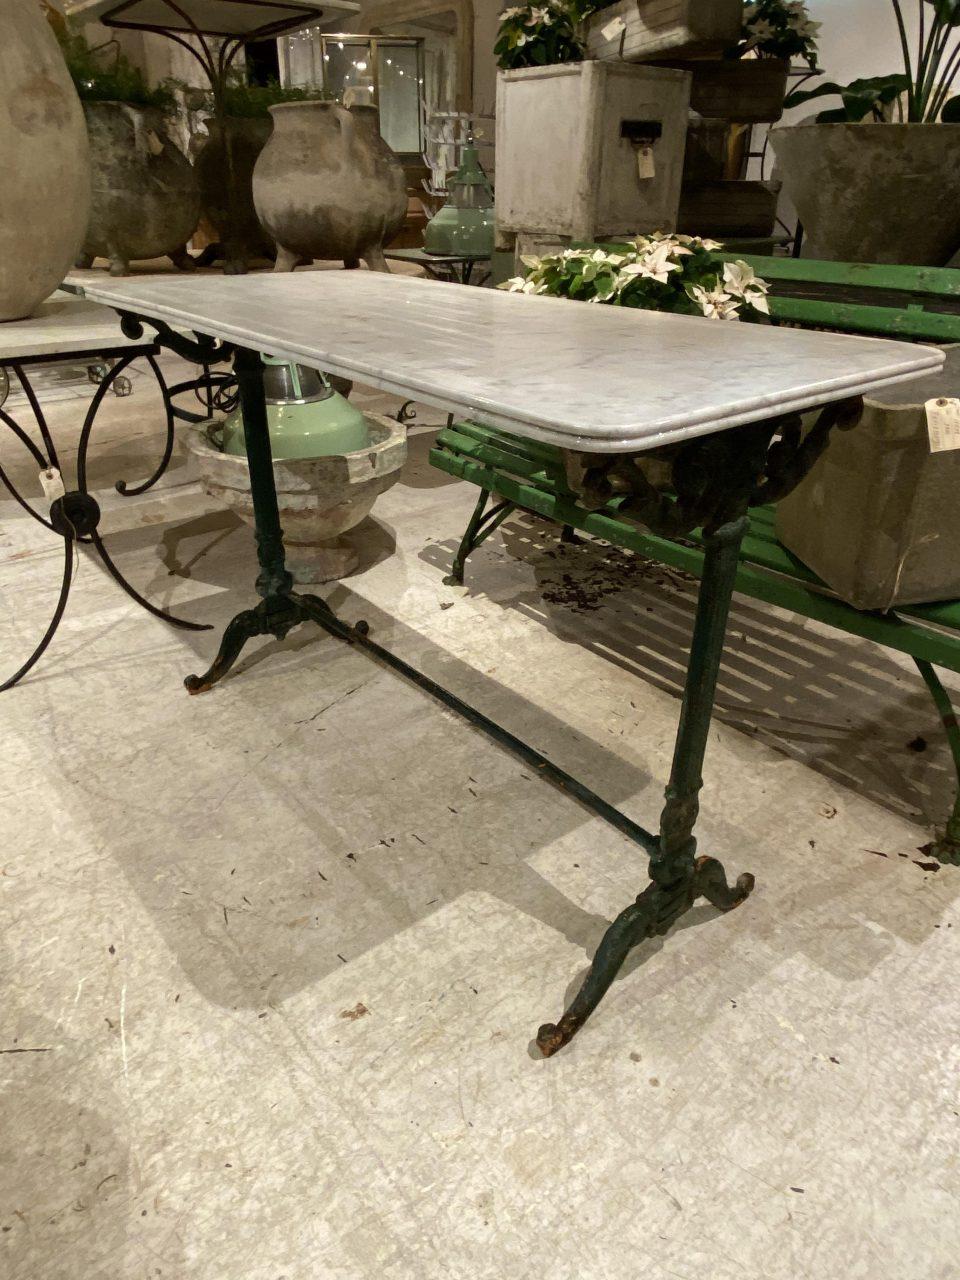 Handsome antique French outdoor table, with a marble counter top. This fantastic piece has a beautiful cast iron frame, and remnants of lovely green paint and genuine weathered patina.